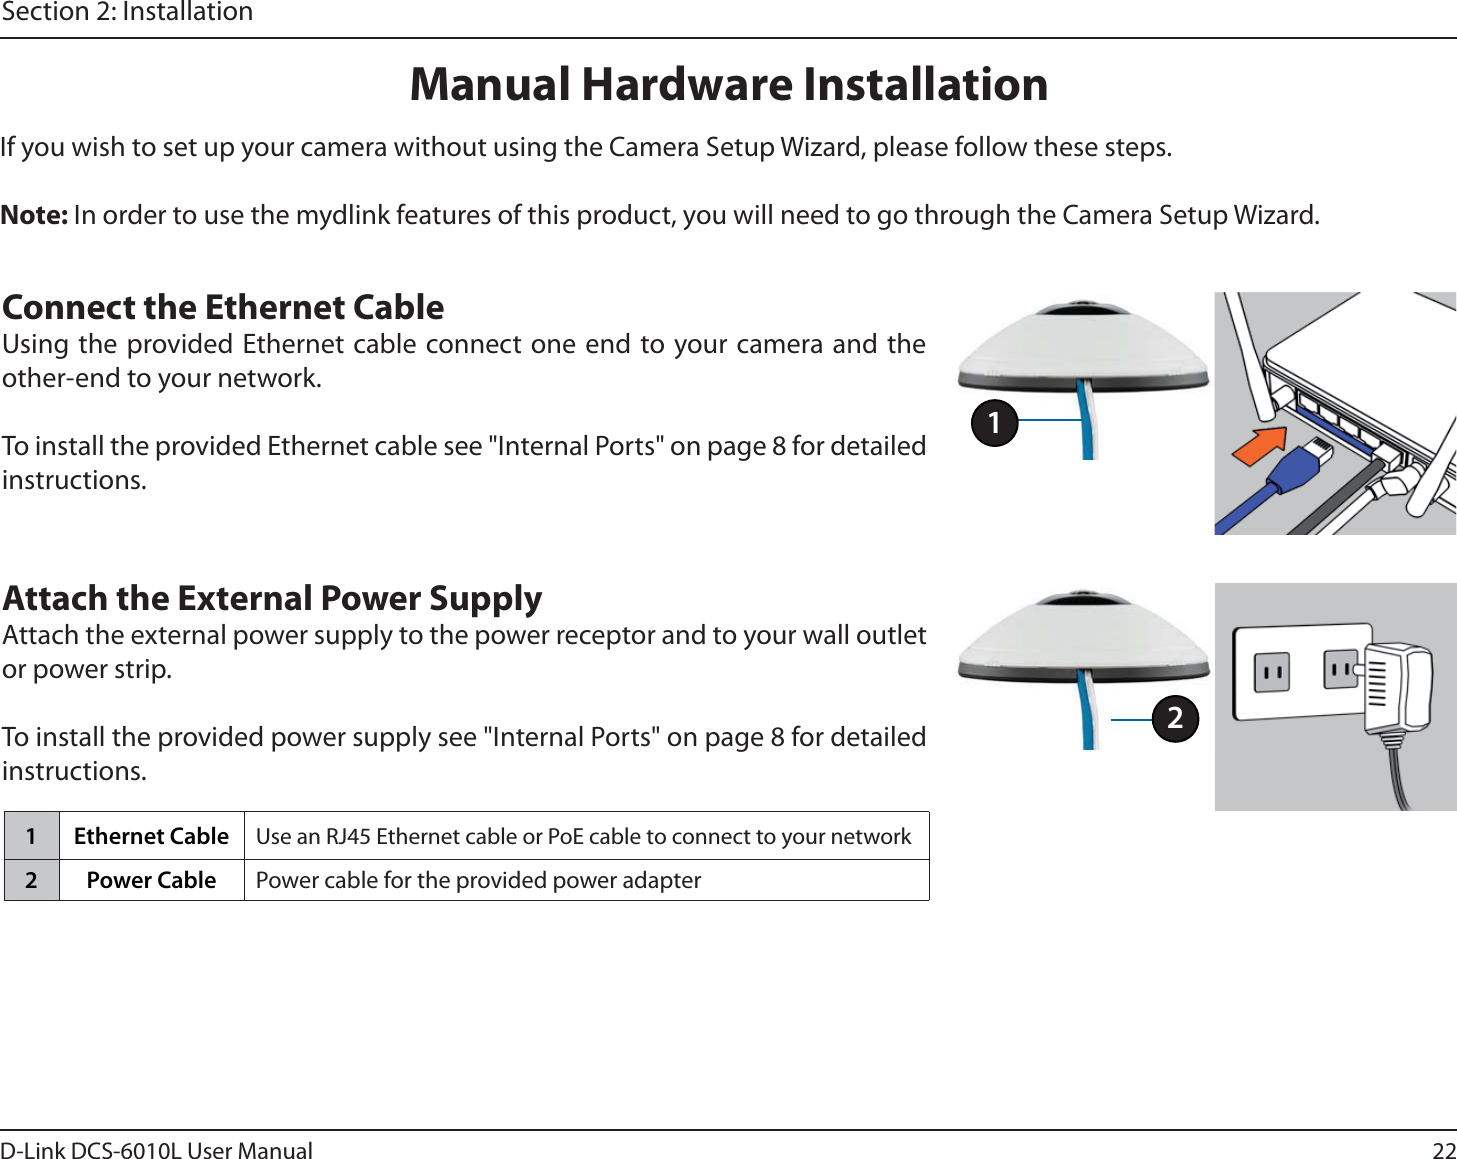 22D-Link DCS-6010L User ManualSection 2: InstallationManual Hardware InstallationIf you wish to set up your camera without using the Camera Setup Wizard, please follow these steps. Note: In order to use the mydlink features of this product, you will need to go through the Camera Setup Wizard.Connect the Ethernet CableUsing the provided Ethernet cable connect one end to your camera and the other-end to your network.To install the provided Ethernet cable see &quot;Internal Ports&quot; on page 8 for detailed instructions.Attach the External Power SupplyAttach the external power supply to the power receptor and to your wall outlet or power strip.To install the provided power supply see &quot;Internal Ports&quot; on page 8 for detailed instructions.11 Ethernet Cable Use an RJ45 Ethernet cable or PoE cable to connect to your network2 Power Cable Power cable for the provided power adapter2